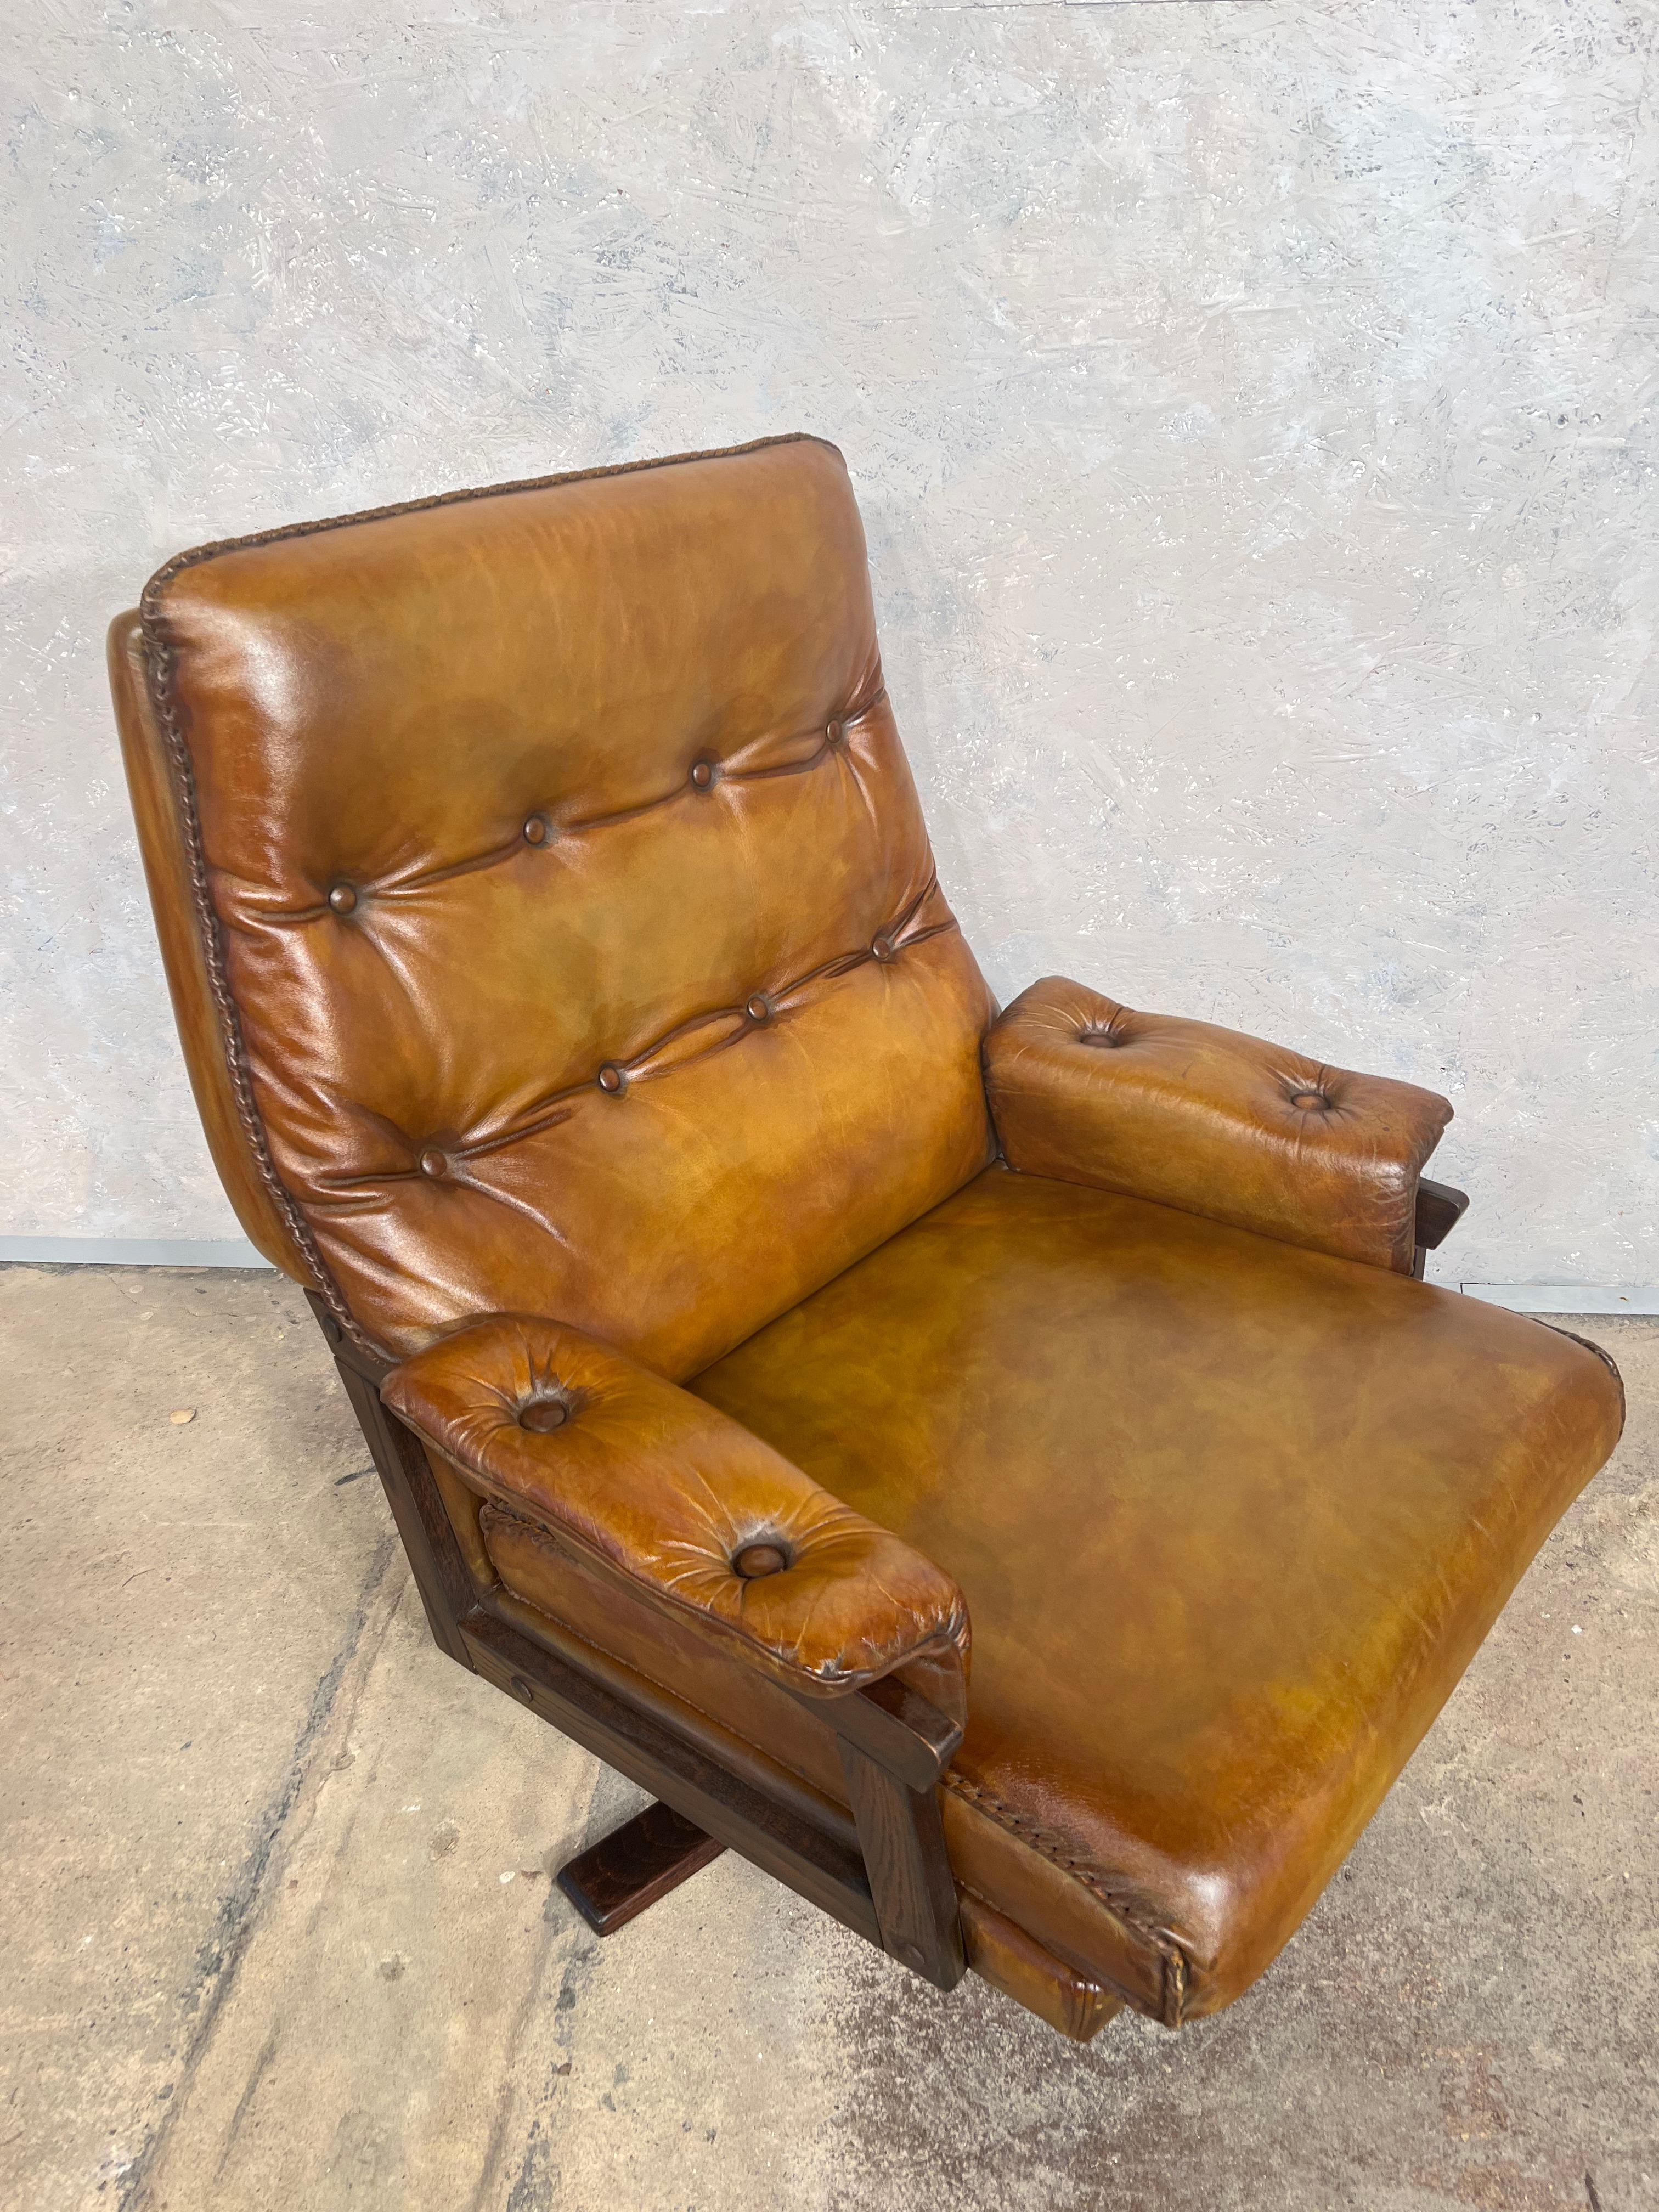 Vintage Arne Norell Leather Swivel Chair Hand dyed Tan #460 In Good Condition For Sale In Lewes, GB